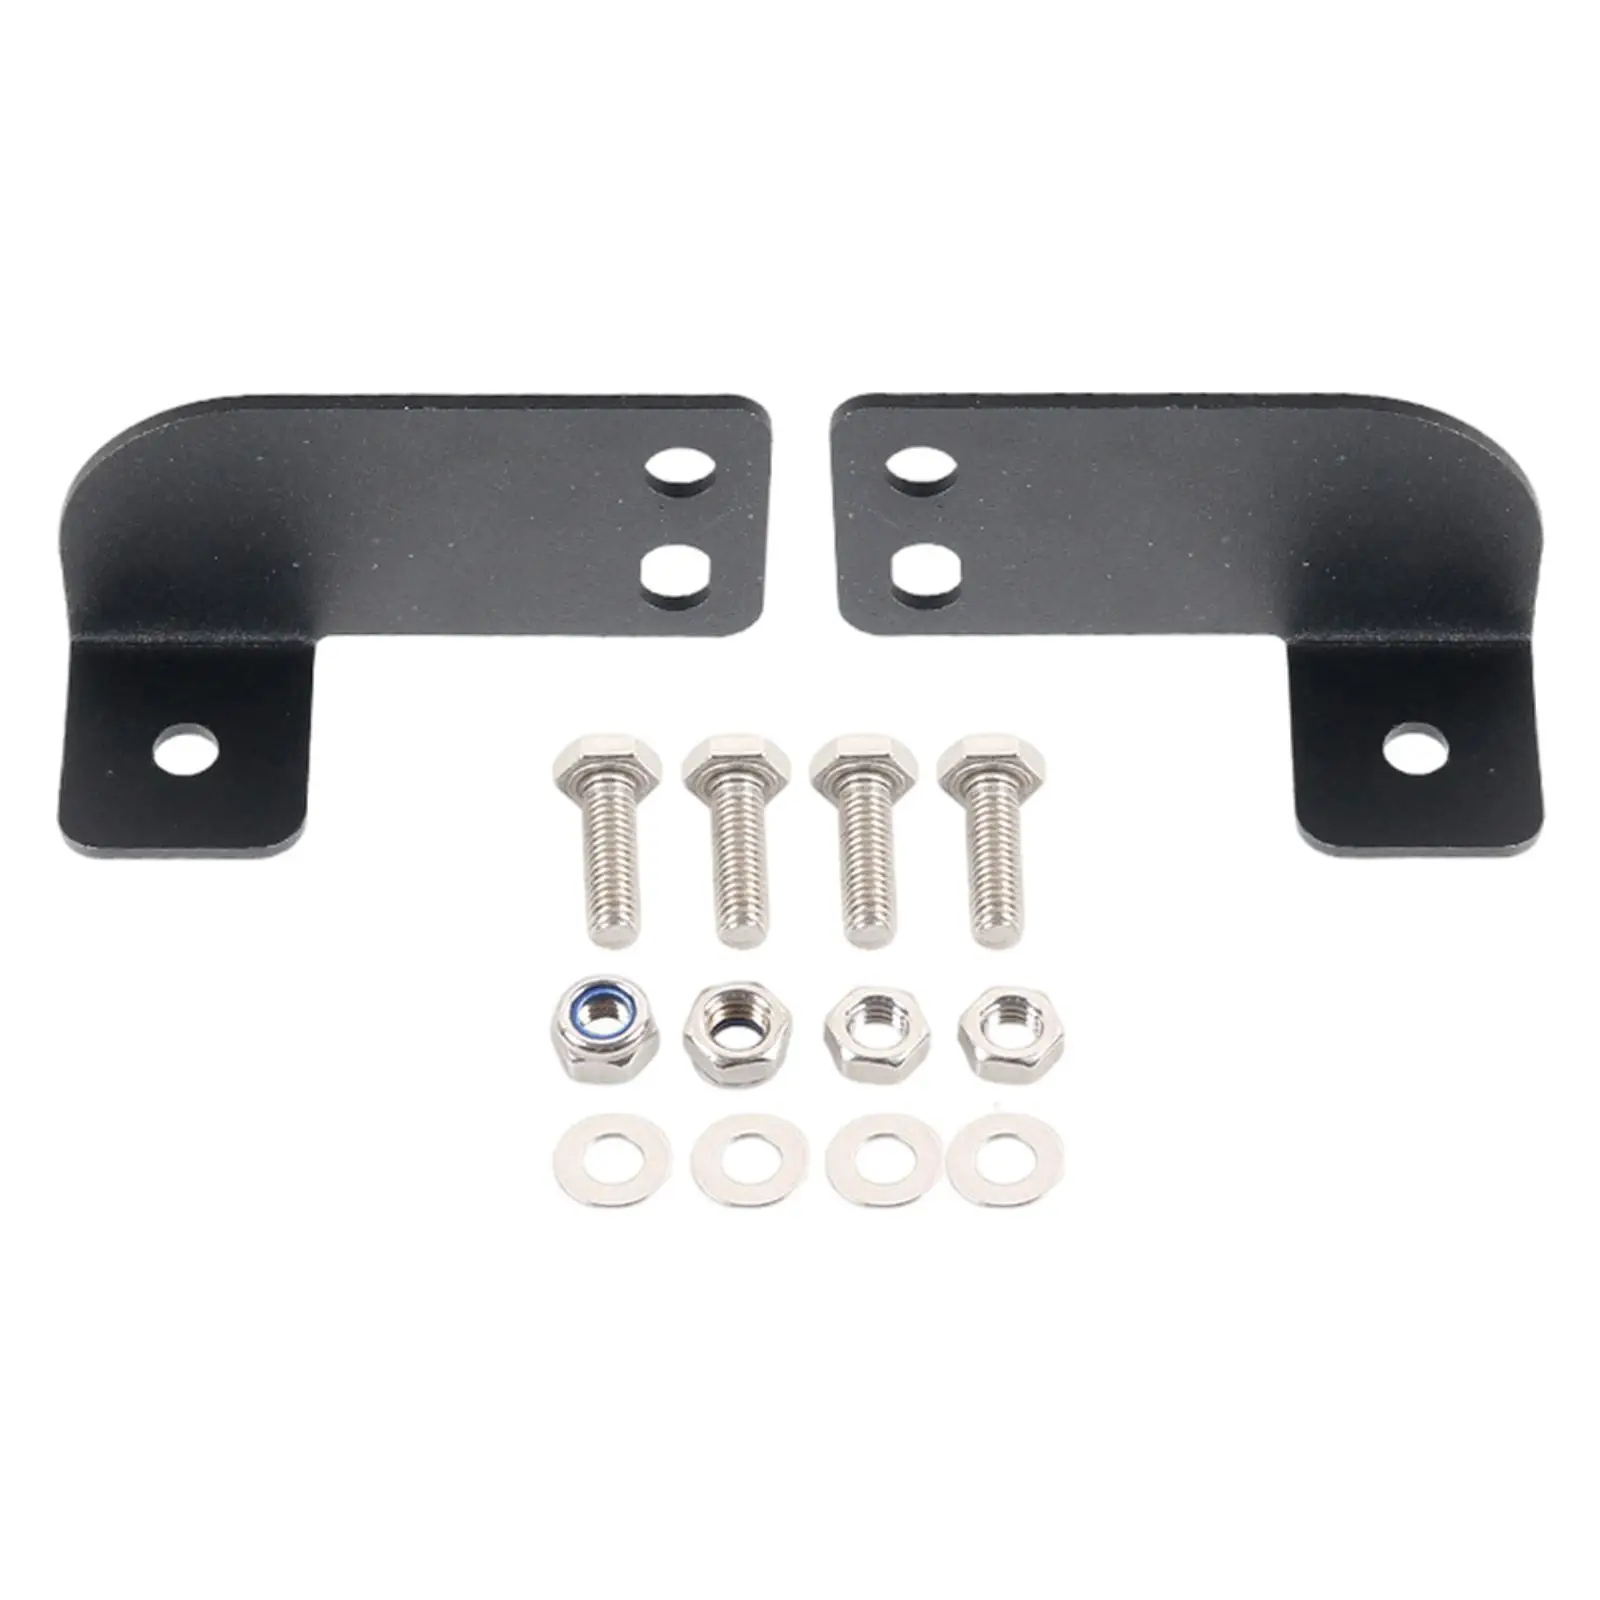 Rear Roof LED Light Bar Mount Brackets fits  2013-21,Easy to Install